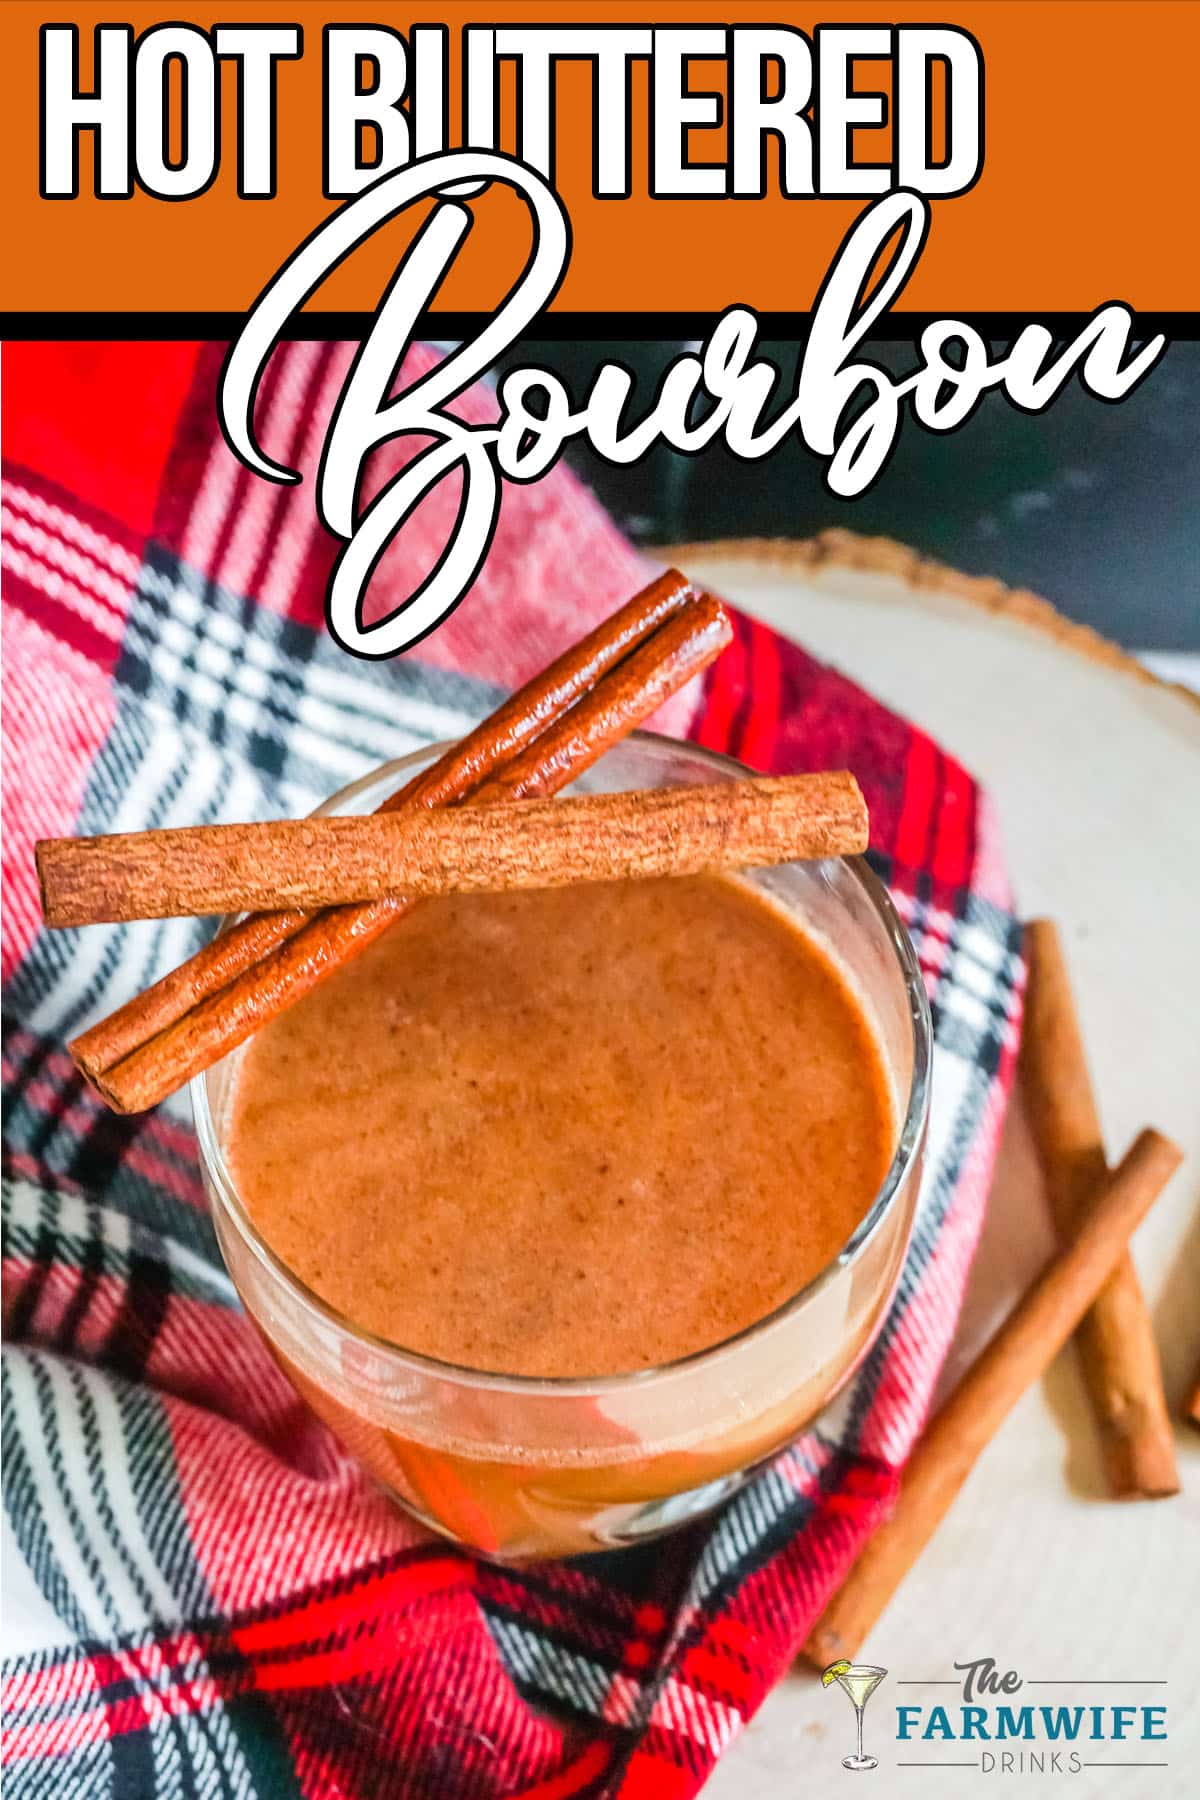 Cinnamon sticks layered on top of Hot Buttered Bourbon Cocktail.